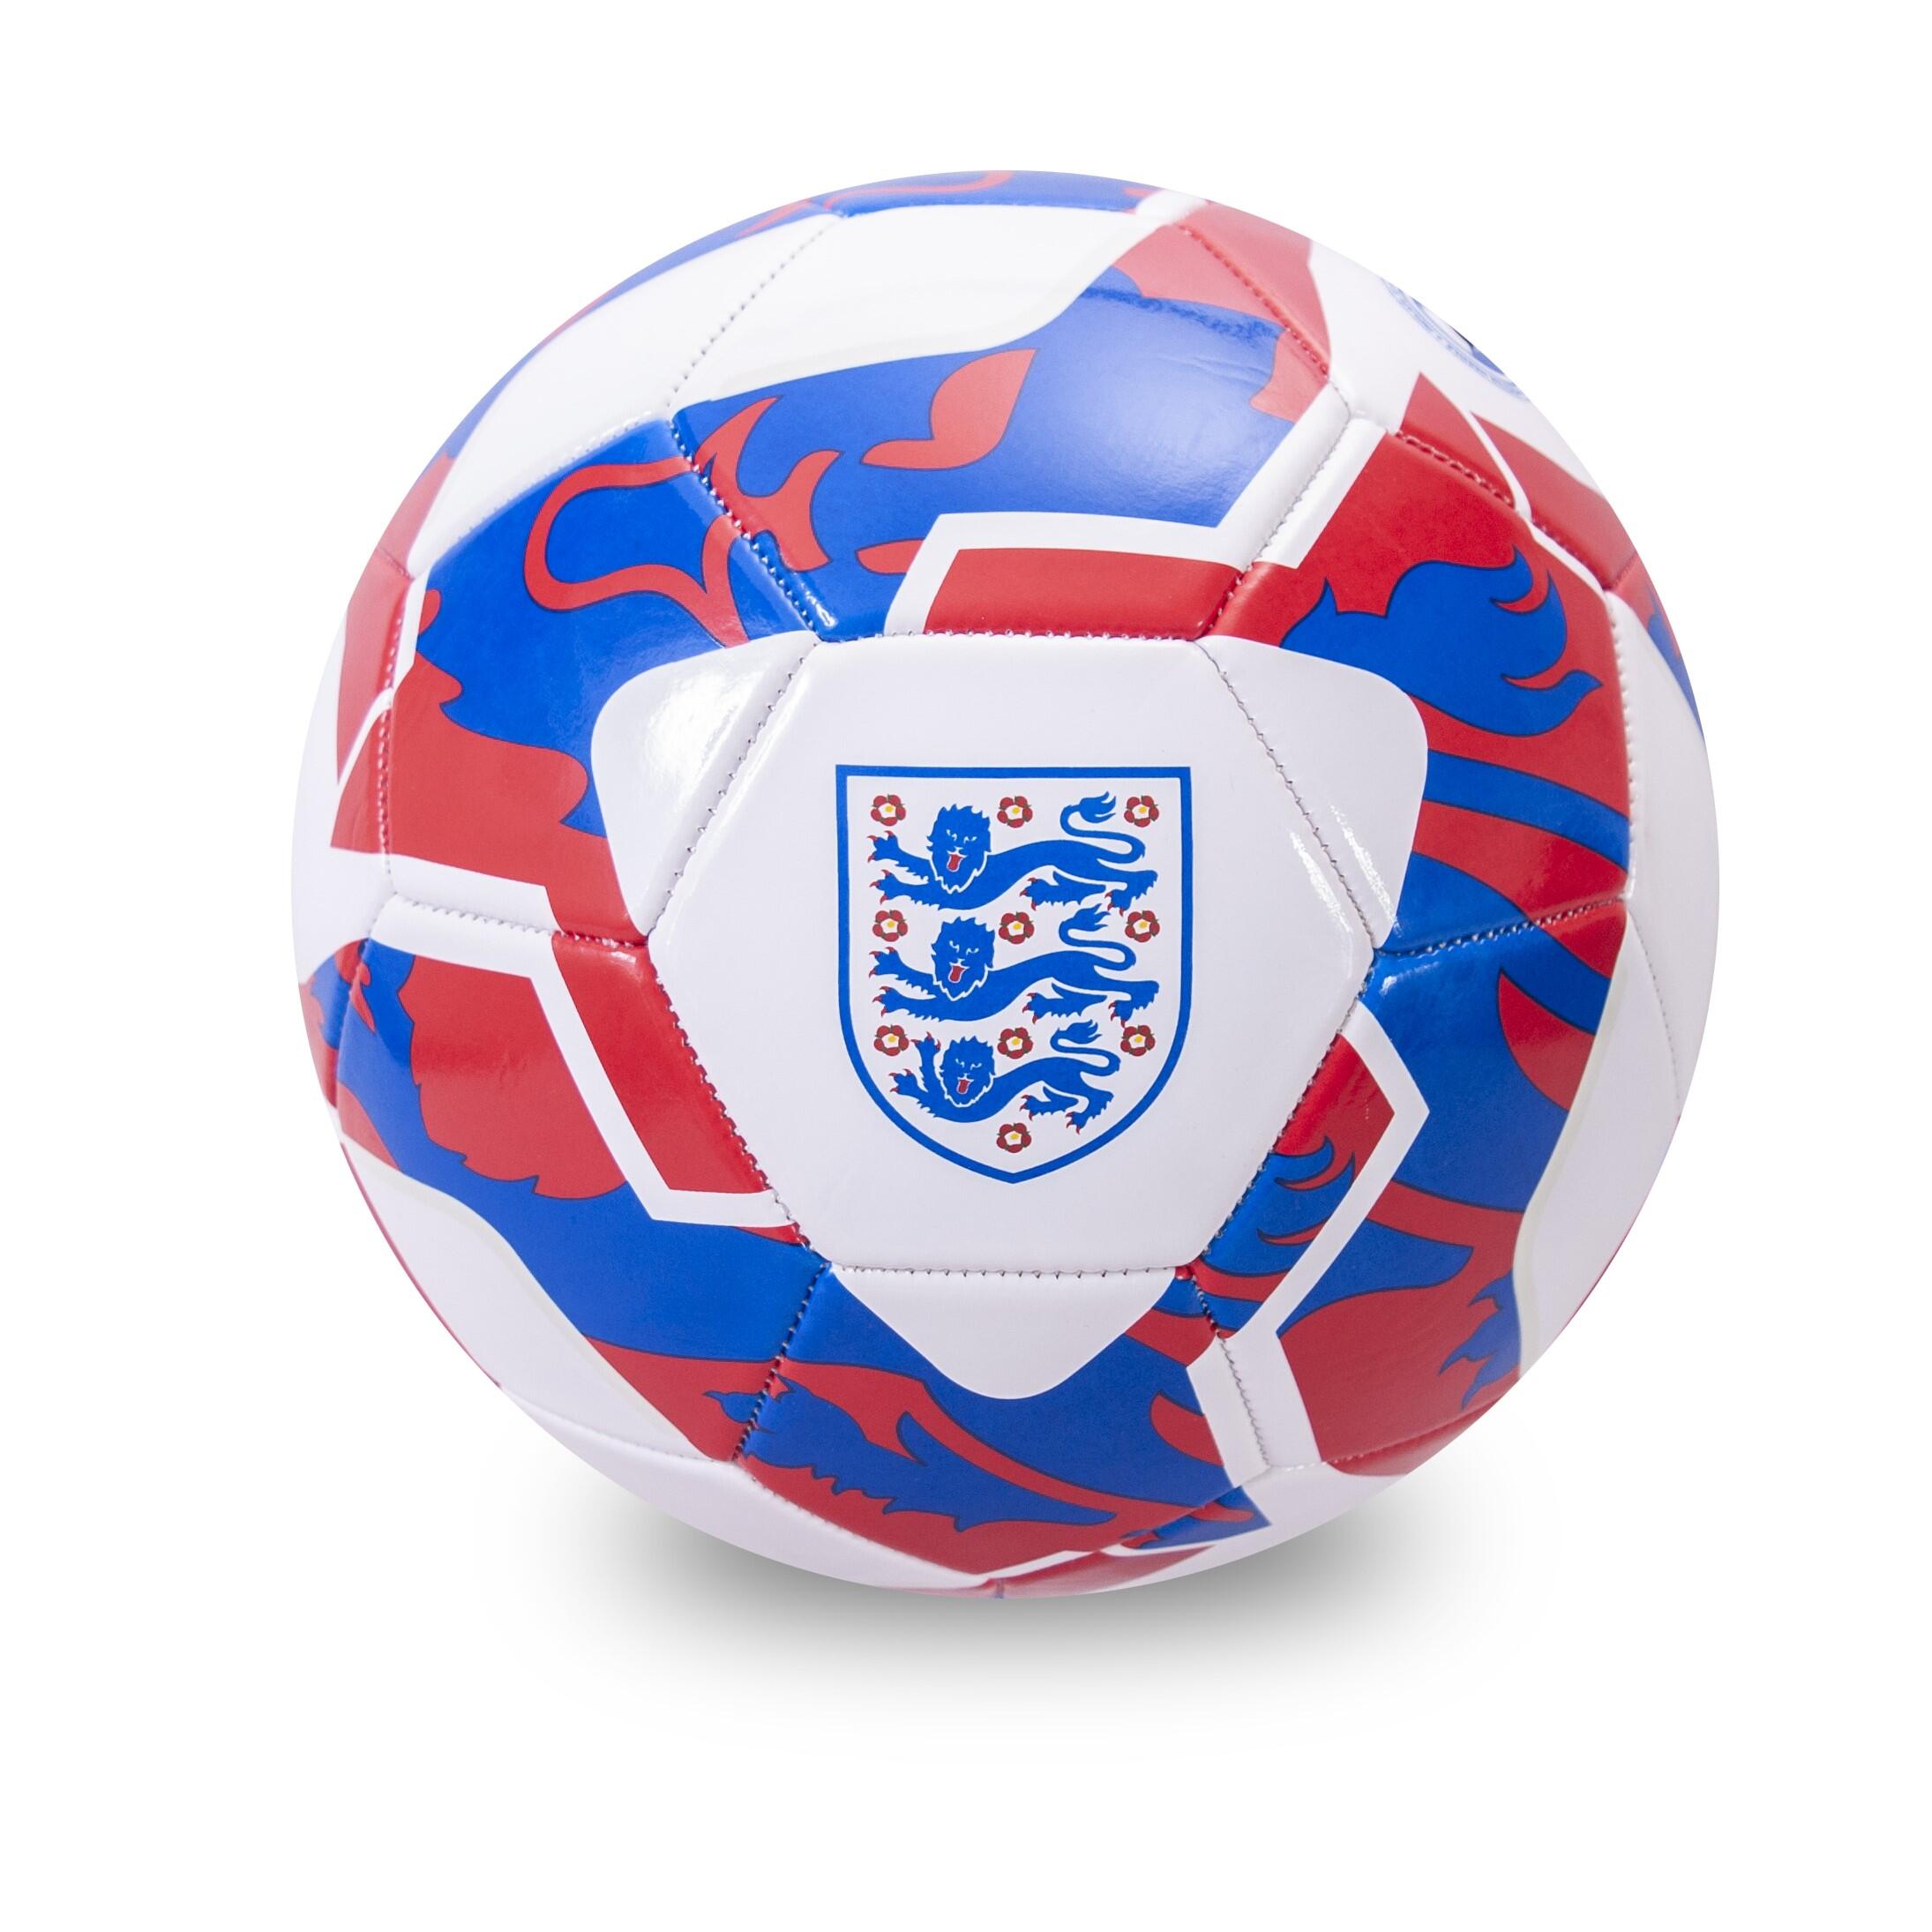 England Supporter Football Size 1 White Blue Red 1/4